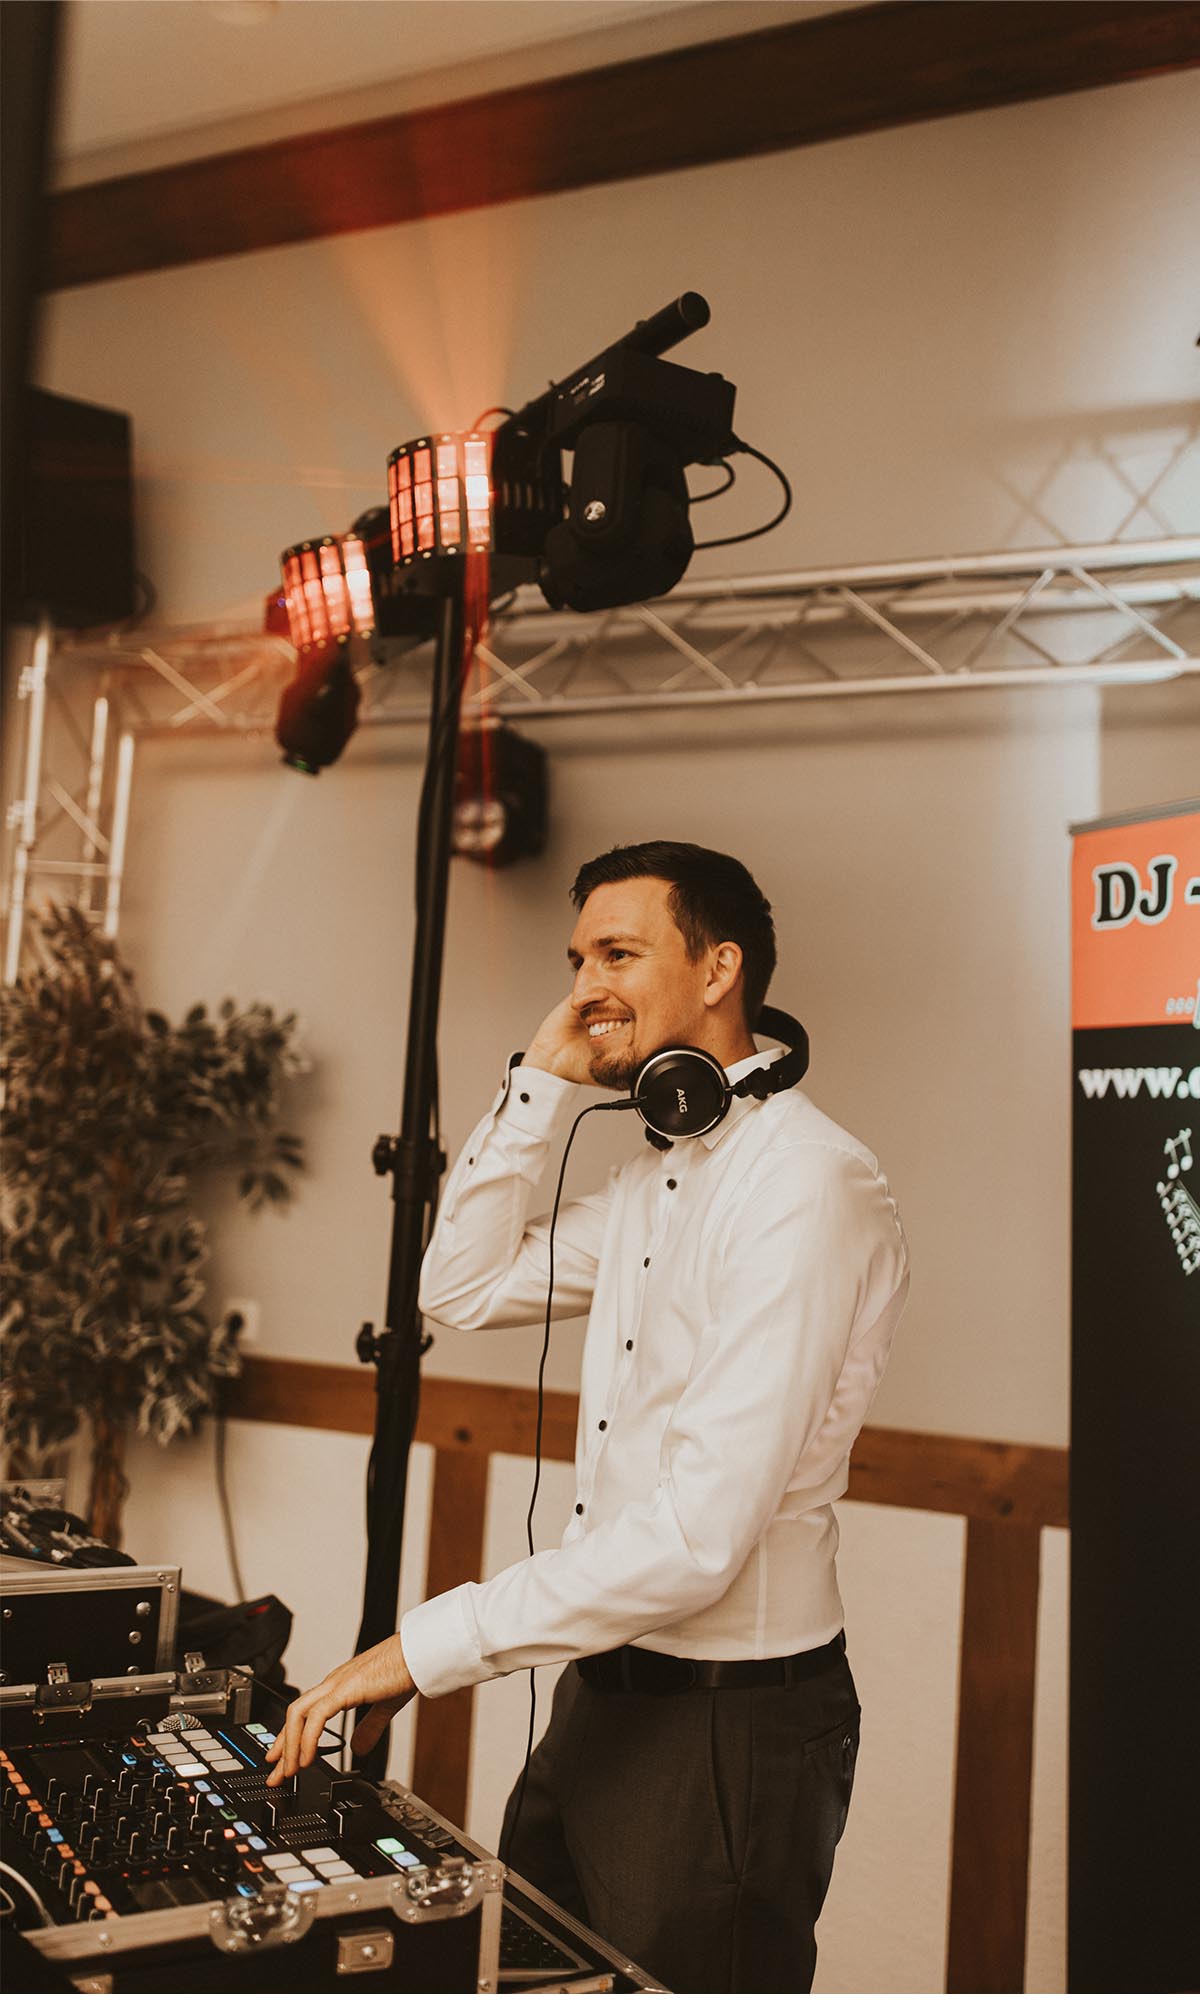 dj-marcel-smile-to-audience